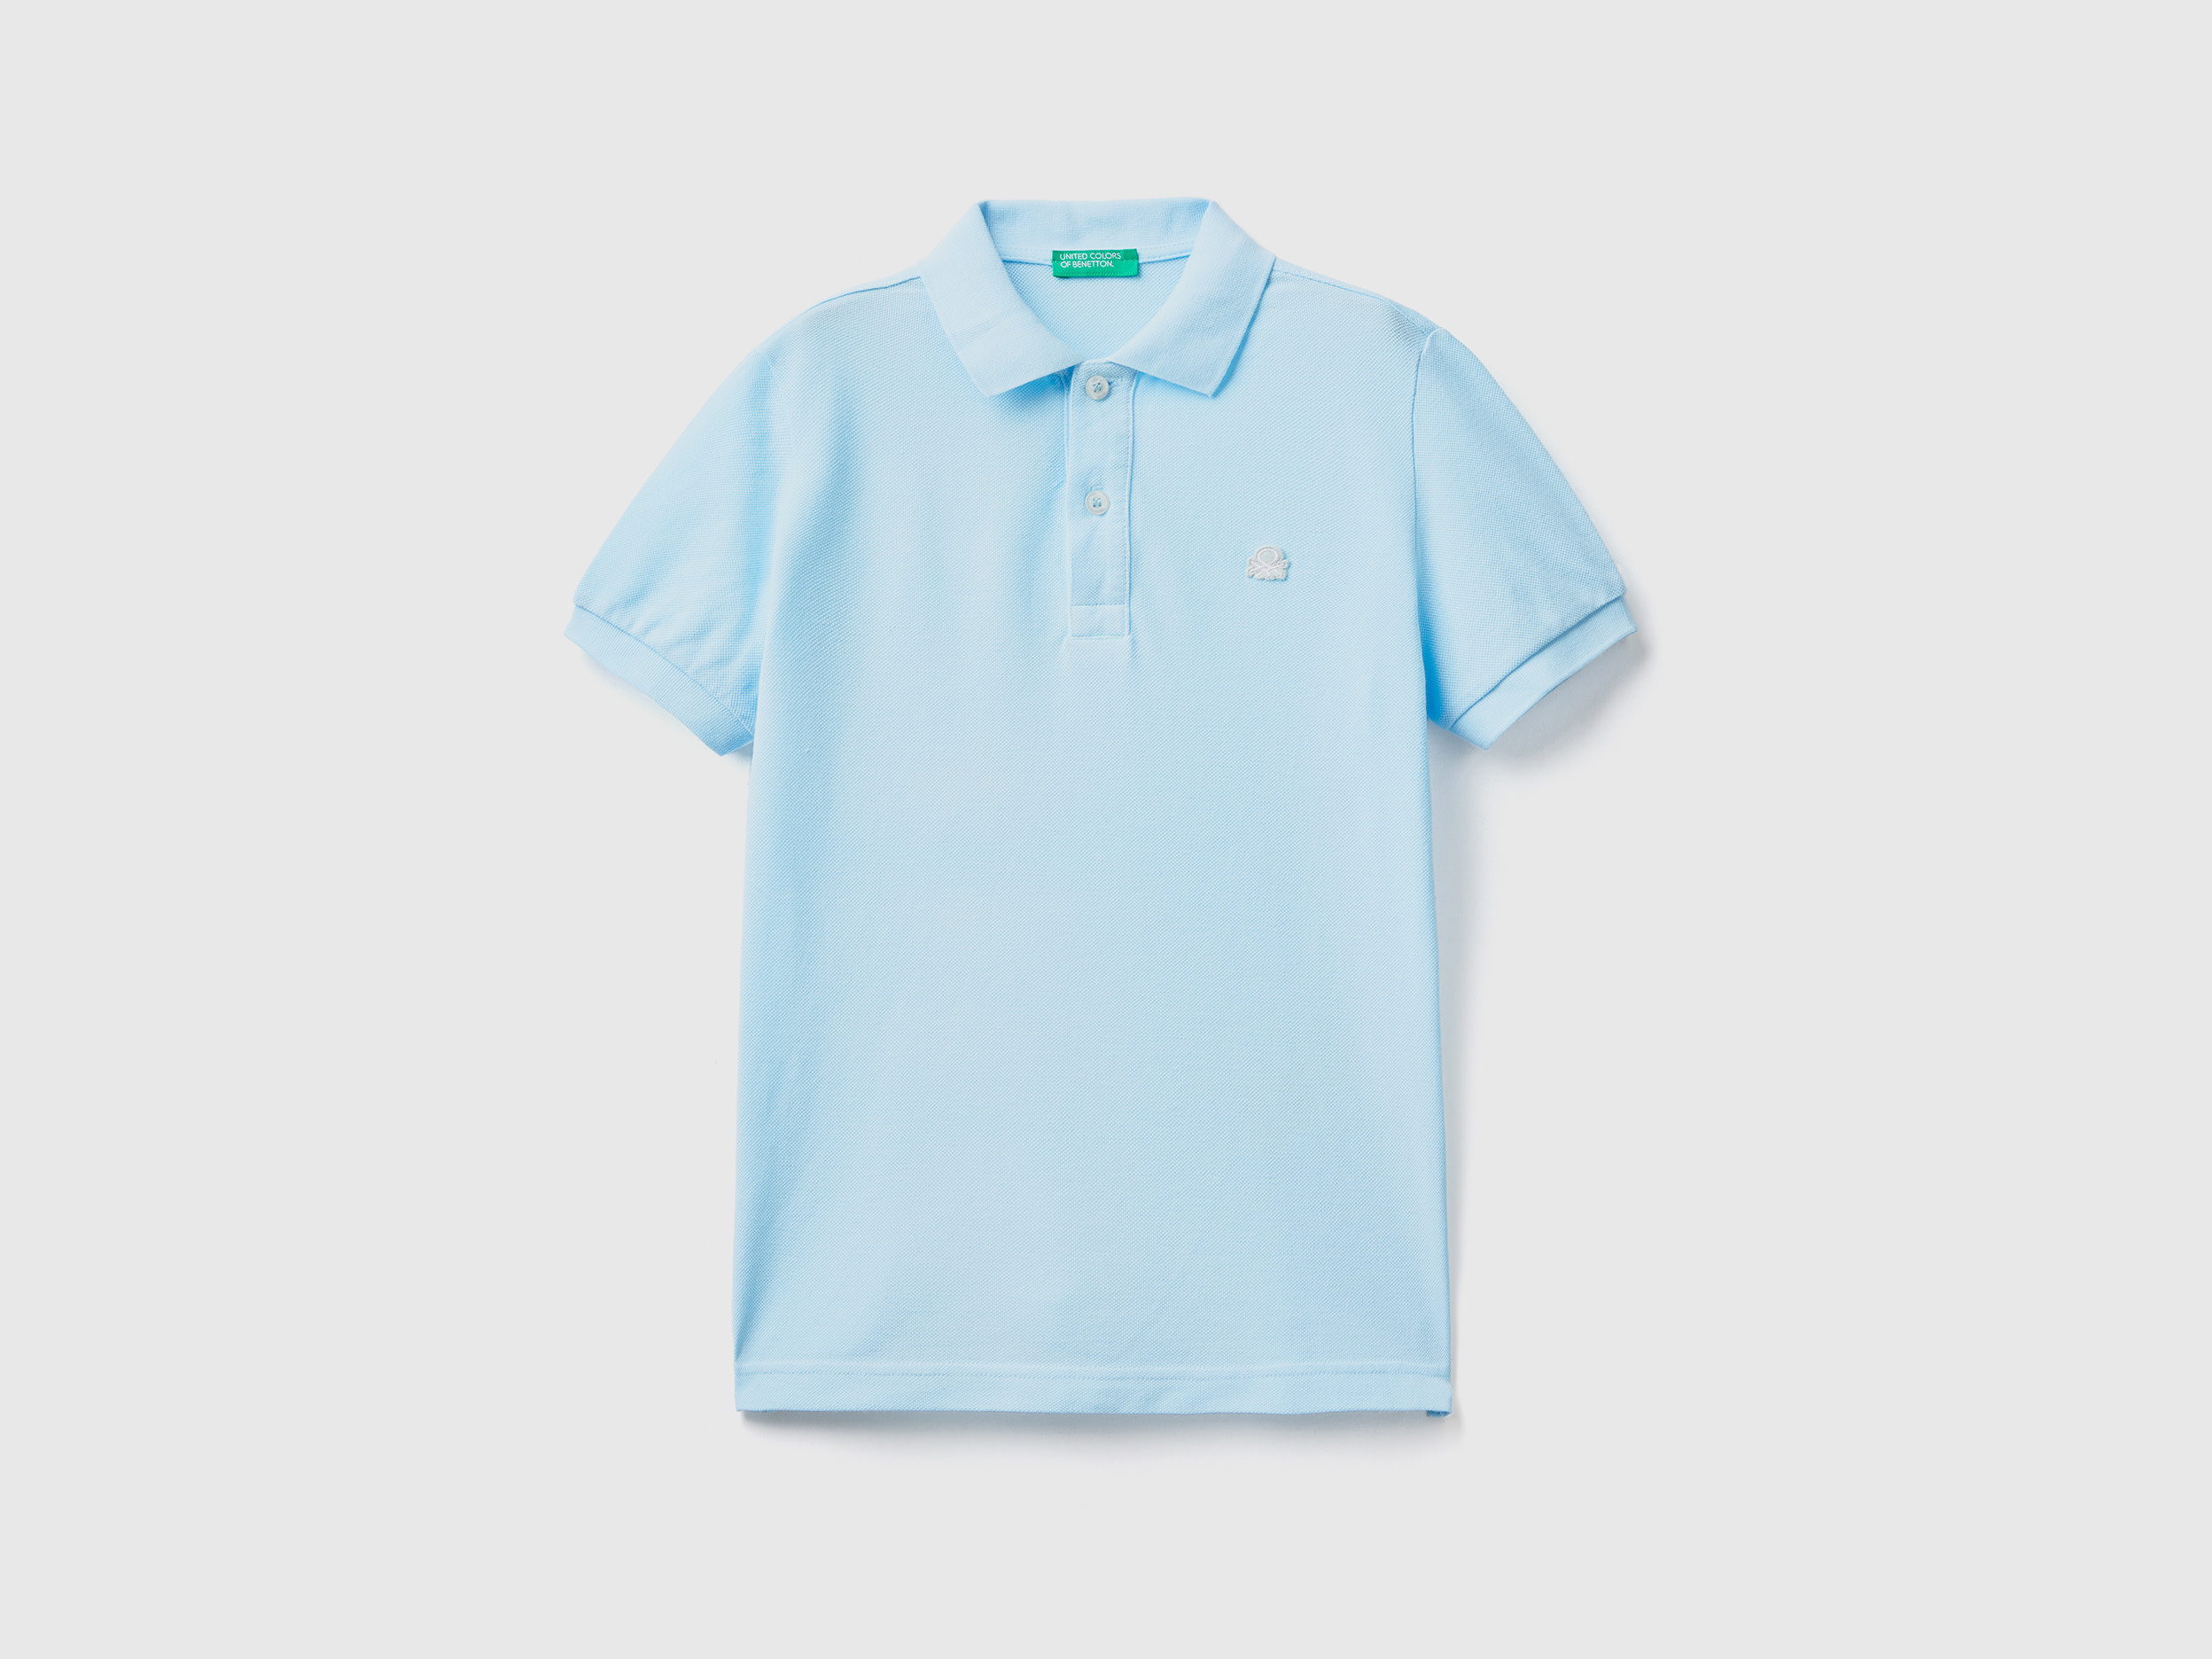 Image of Benetton, Neon Polo In Organic Cotton, size S, , Kids